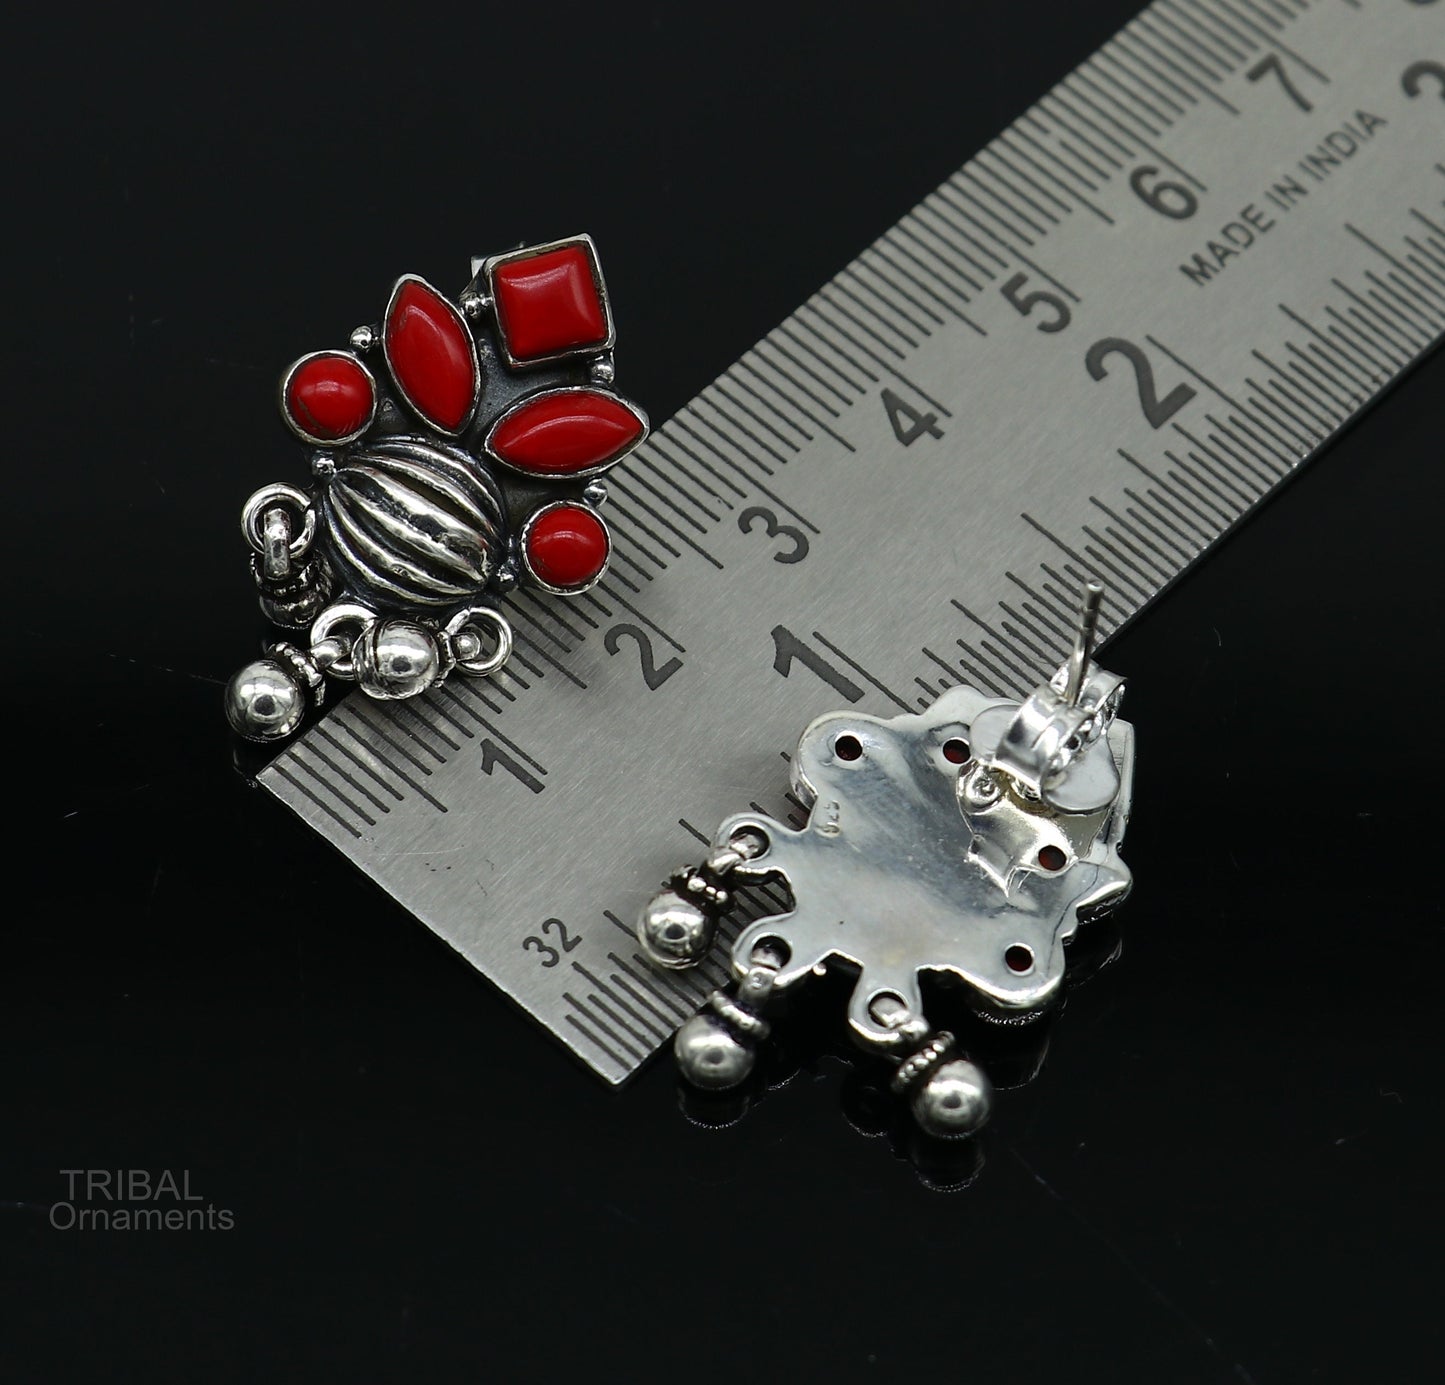 Vintage stylish design customized hanging drops 925 sterling silver stud earring with red coral stone, best bride jewelry s1003 - TRIBAL ORNAMENTS